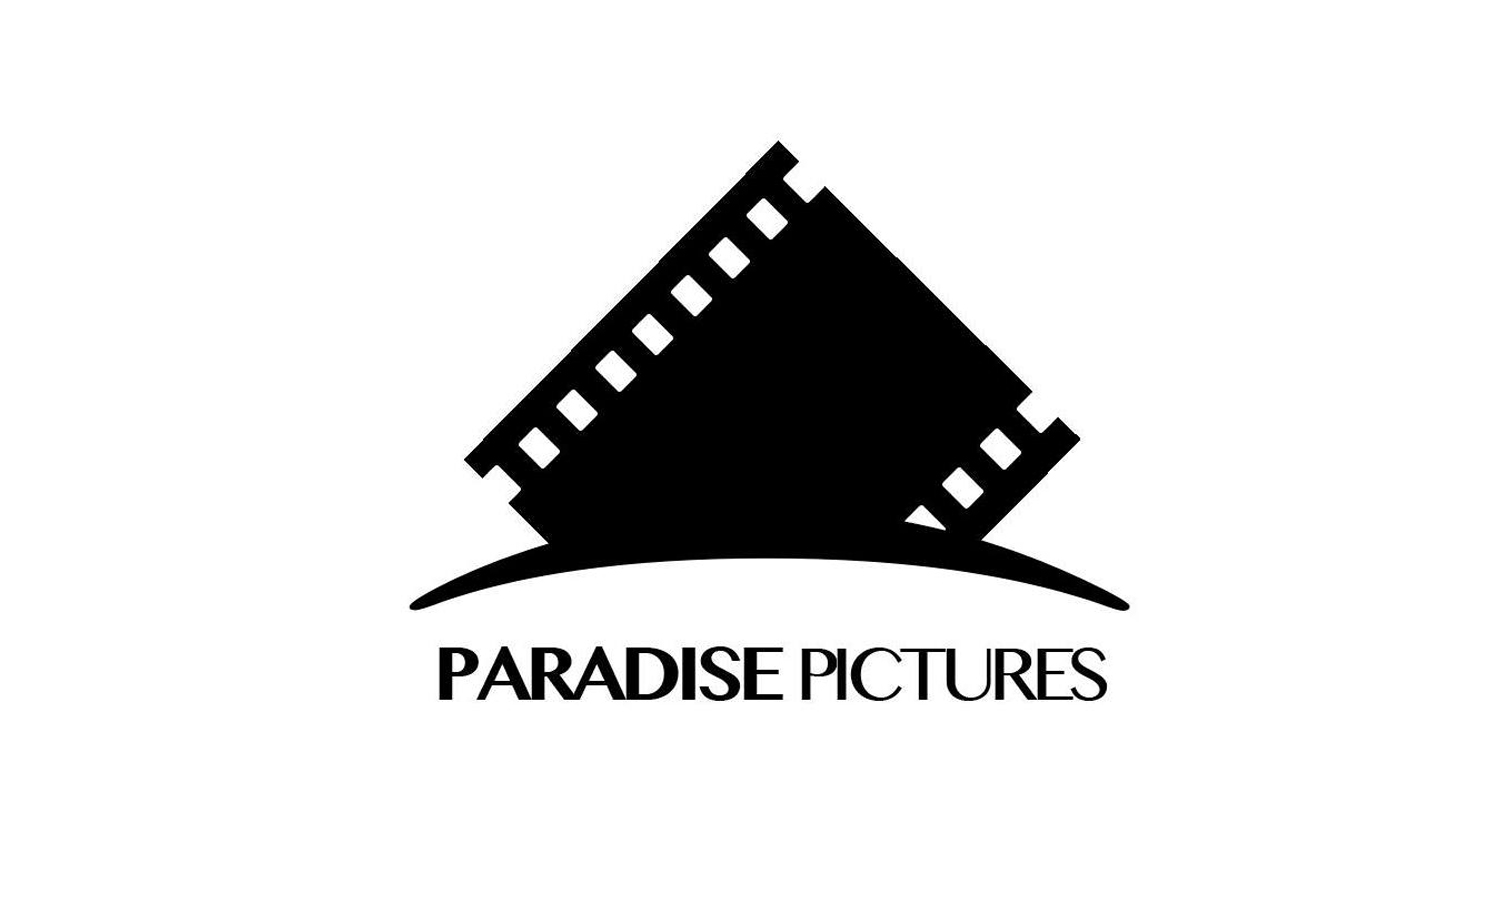 PARADISE PICTURES